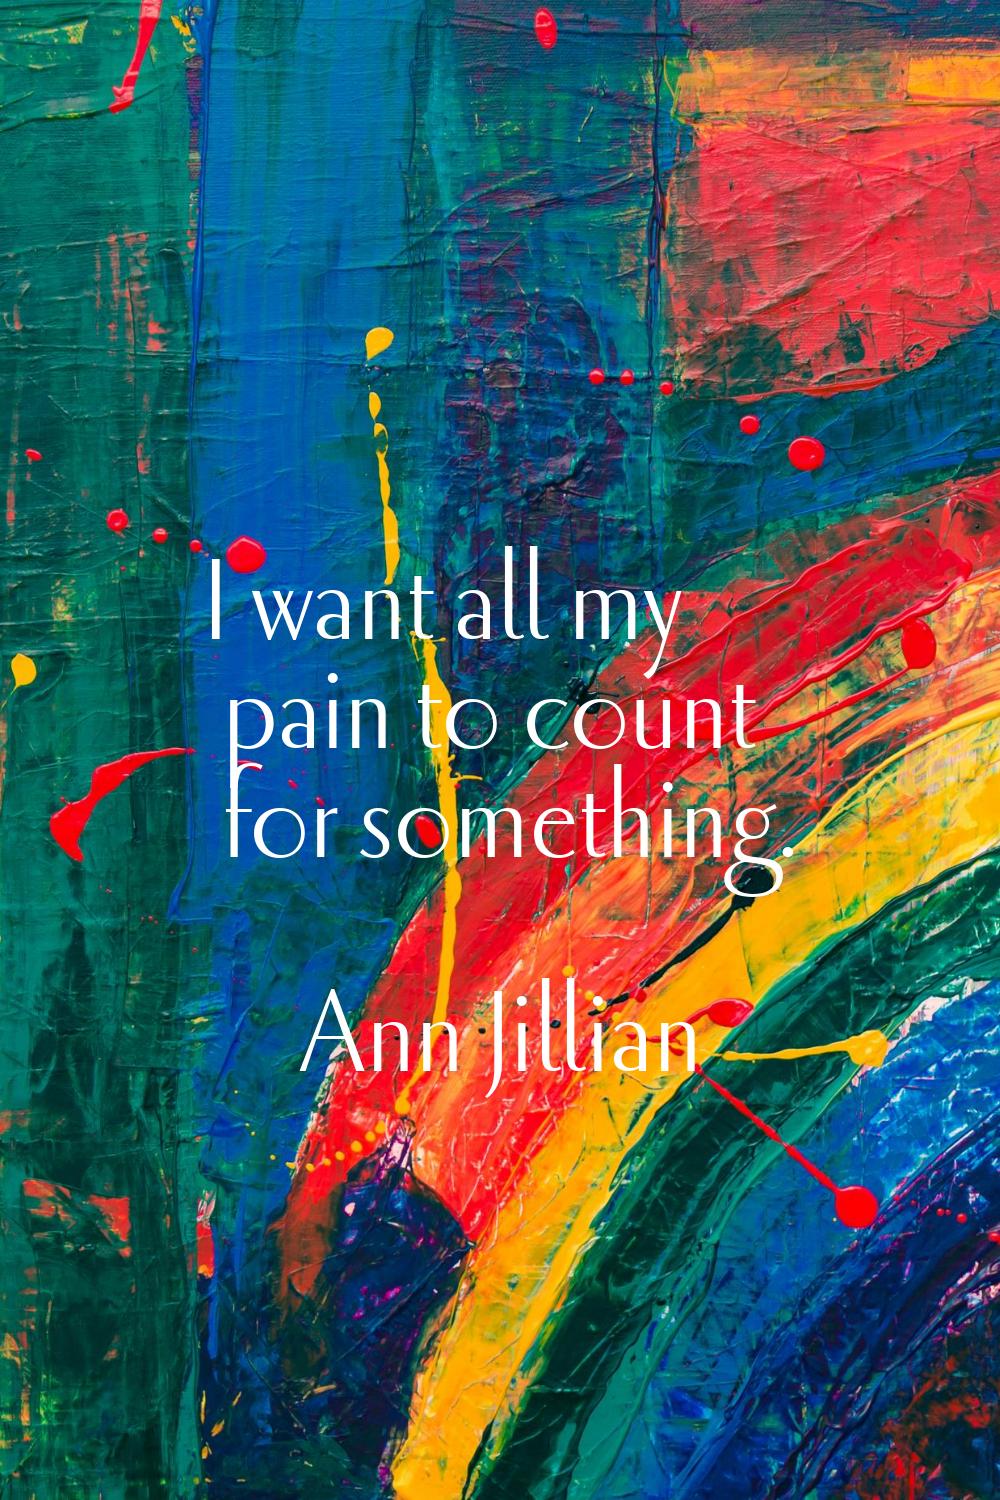 I want all my pain to count for something.